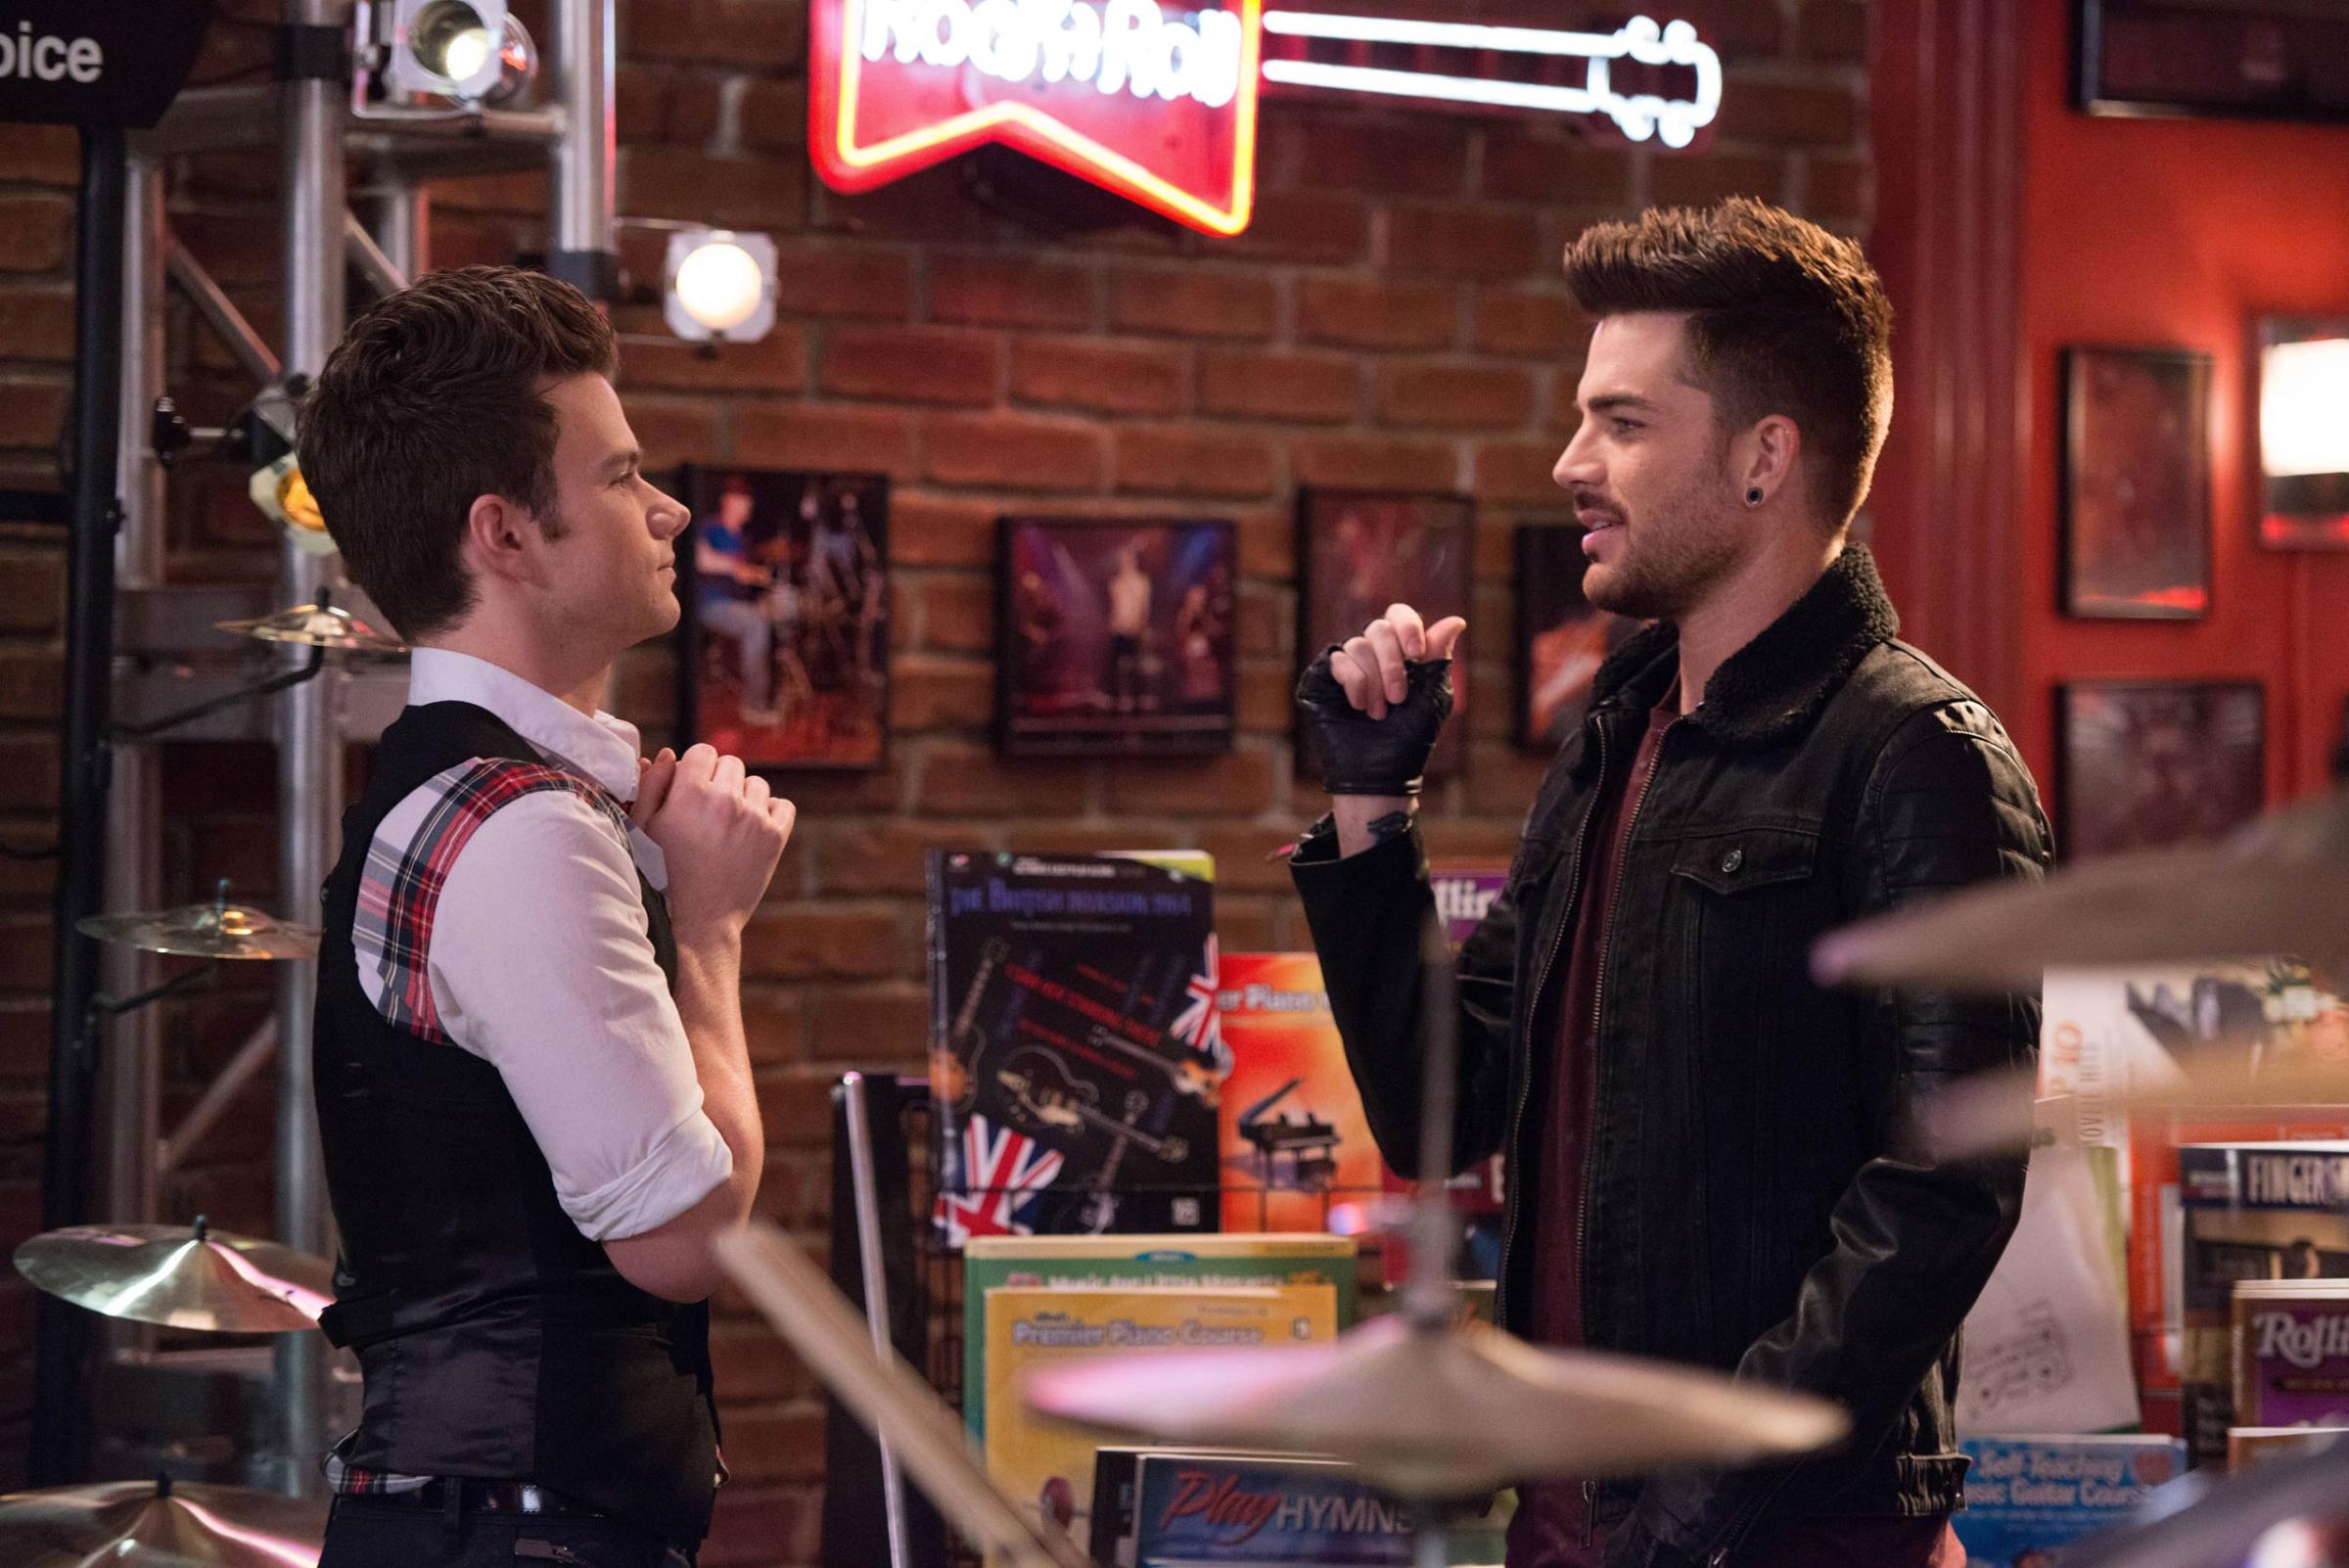 GLEE: Elliott (guest star Adam Lambert, R) meets up with Kurt (Chris Colfer, L) in the "New New York" episode of GLEE airing Tuesday, April 1 (8:00-9:00 PM ET/PT) on FOX. ©Fox Broadcasting Co. CR: Eddy Chen/FOX